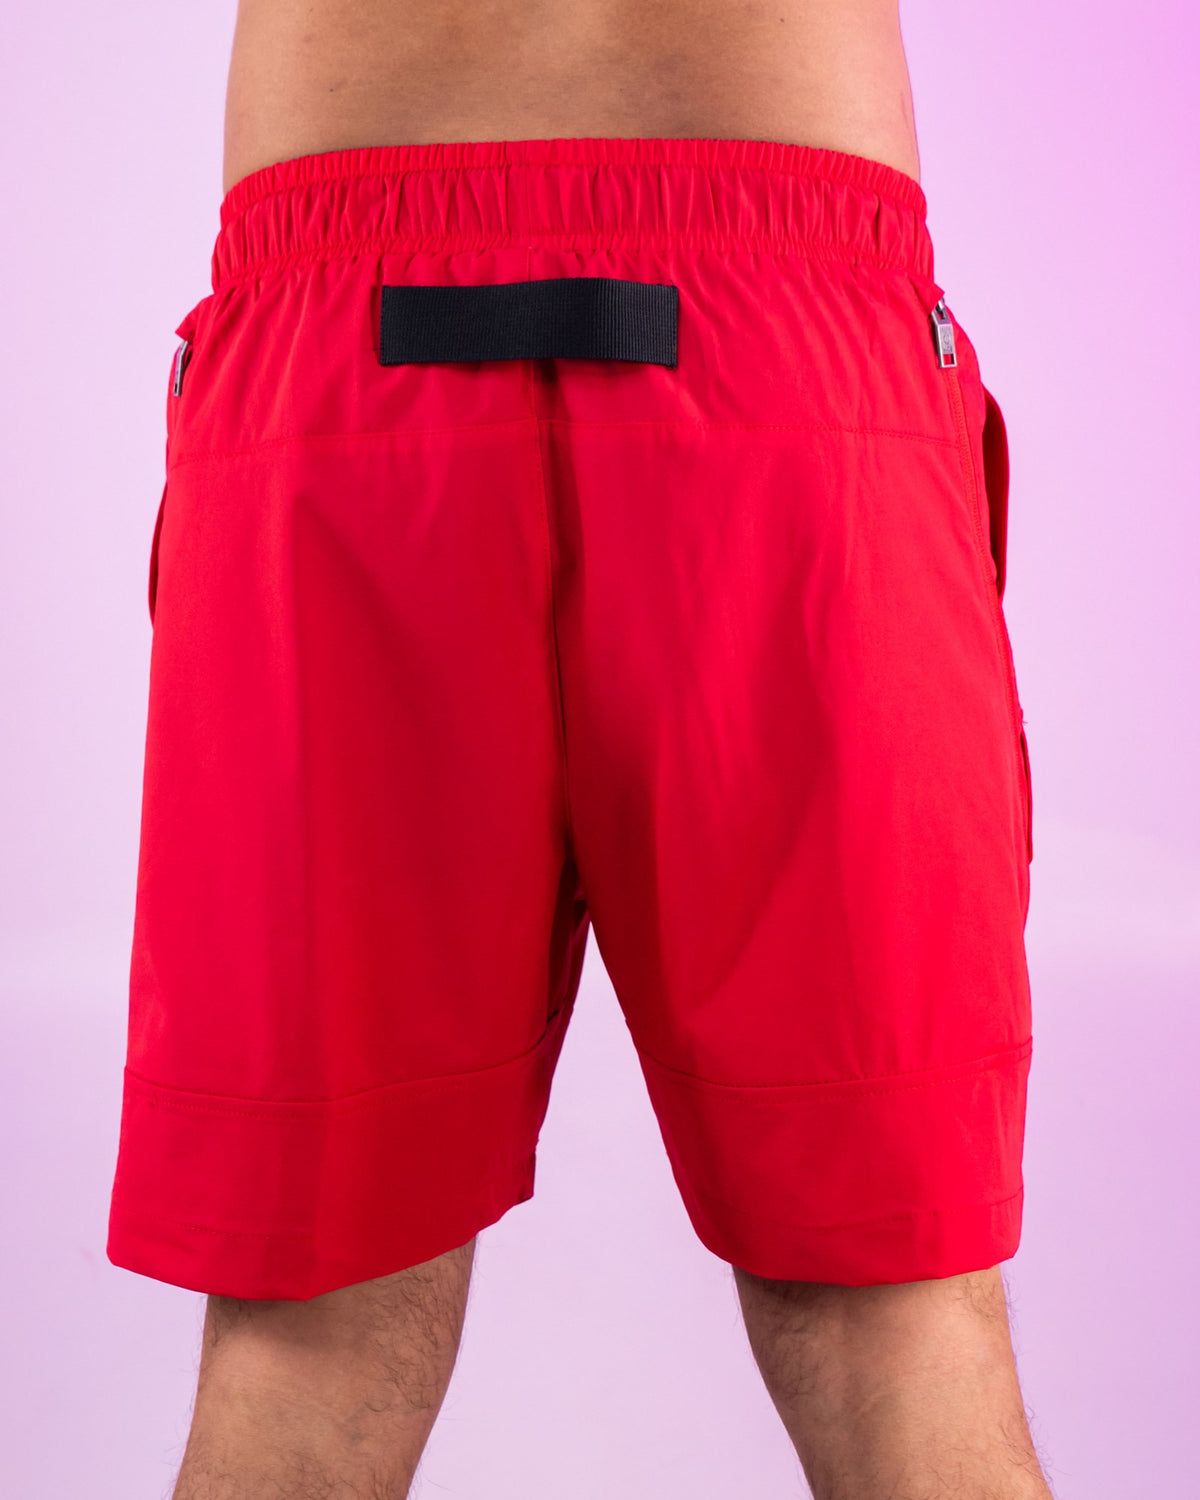 Red Nylon 6 inch Inseam Shorts S | Rave Wonderland | Outfits Rave | Festival Outfits | Rave Clothes